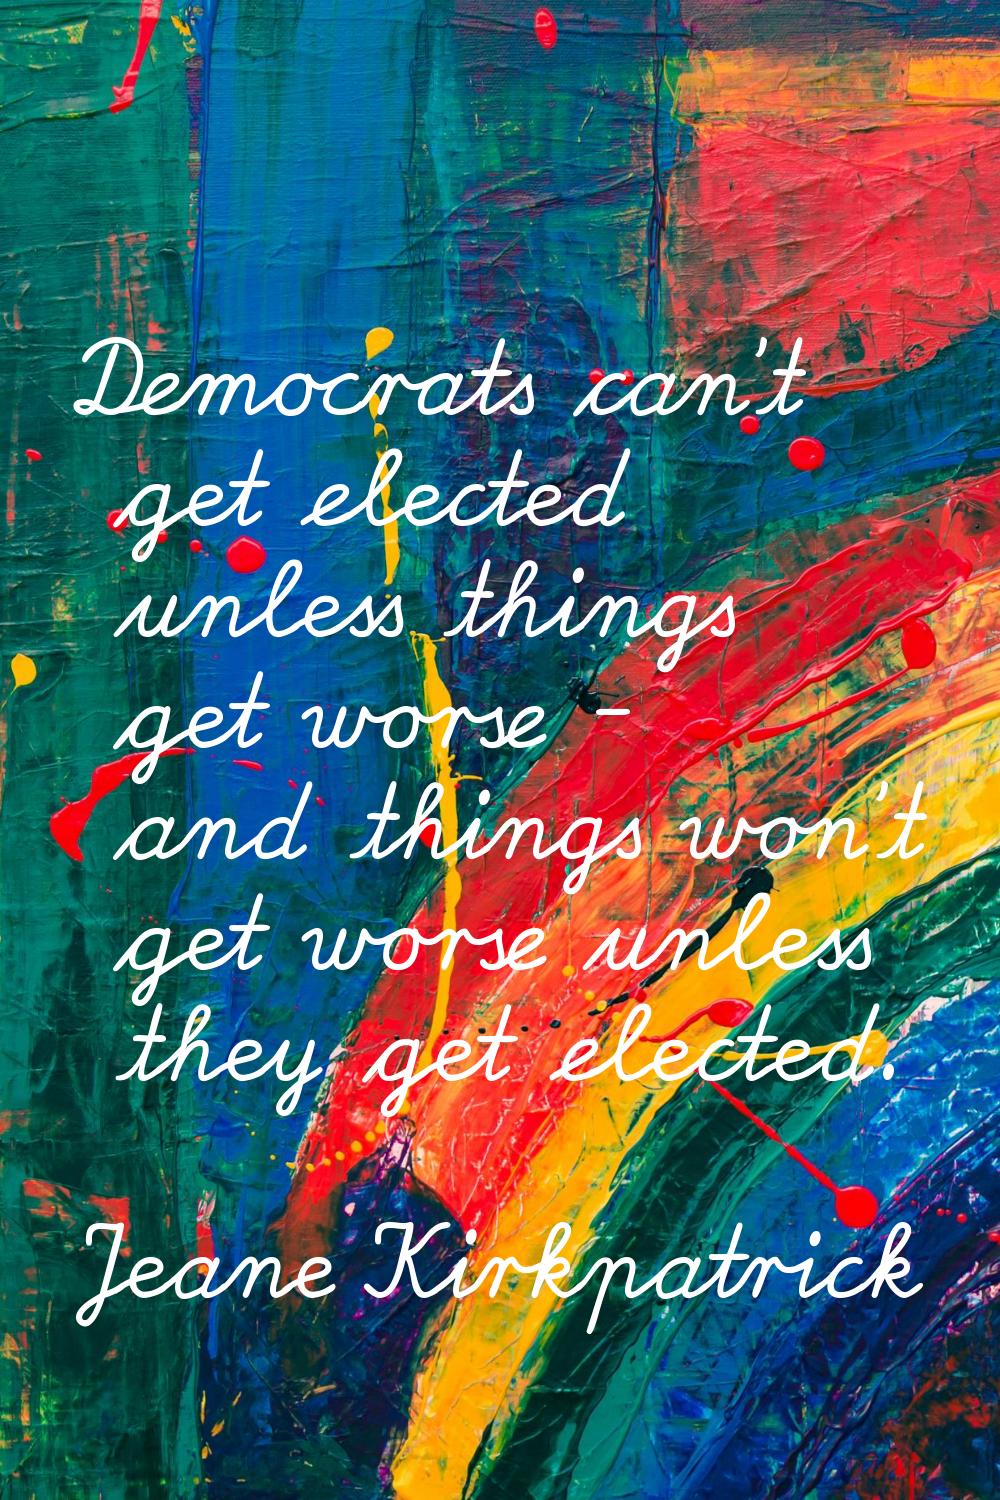 Democrats can't get elected unless things get worse - and things won't get worse unless they get el